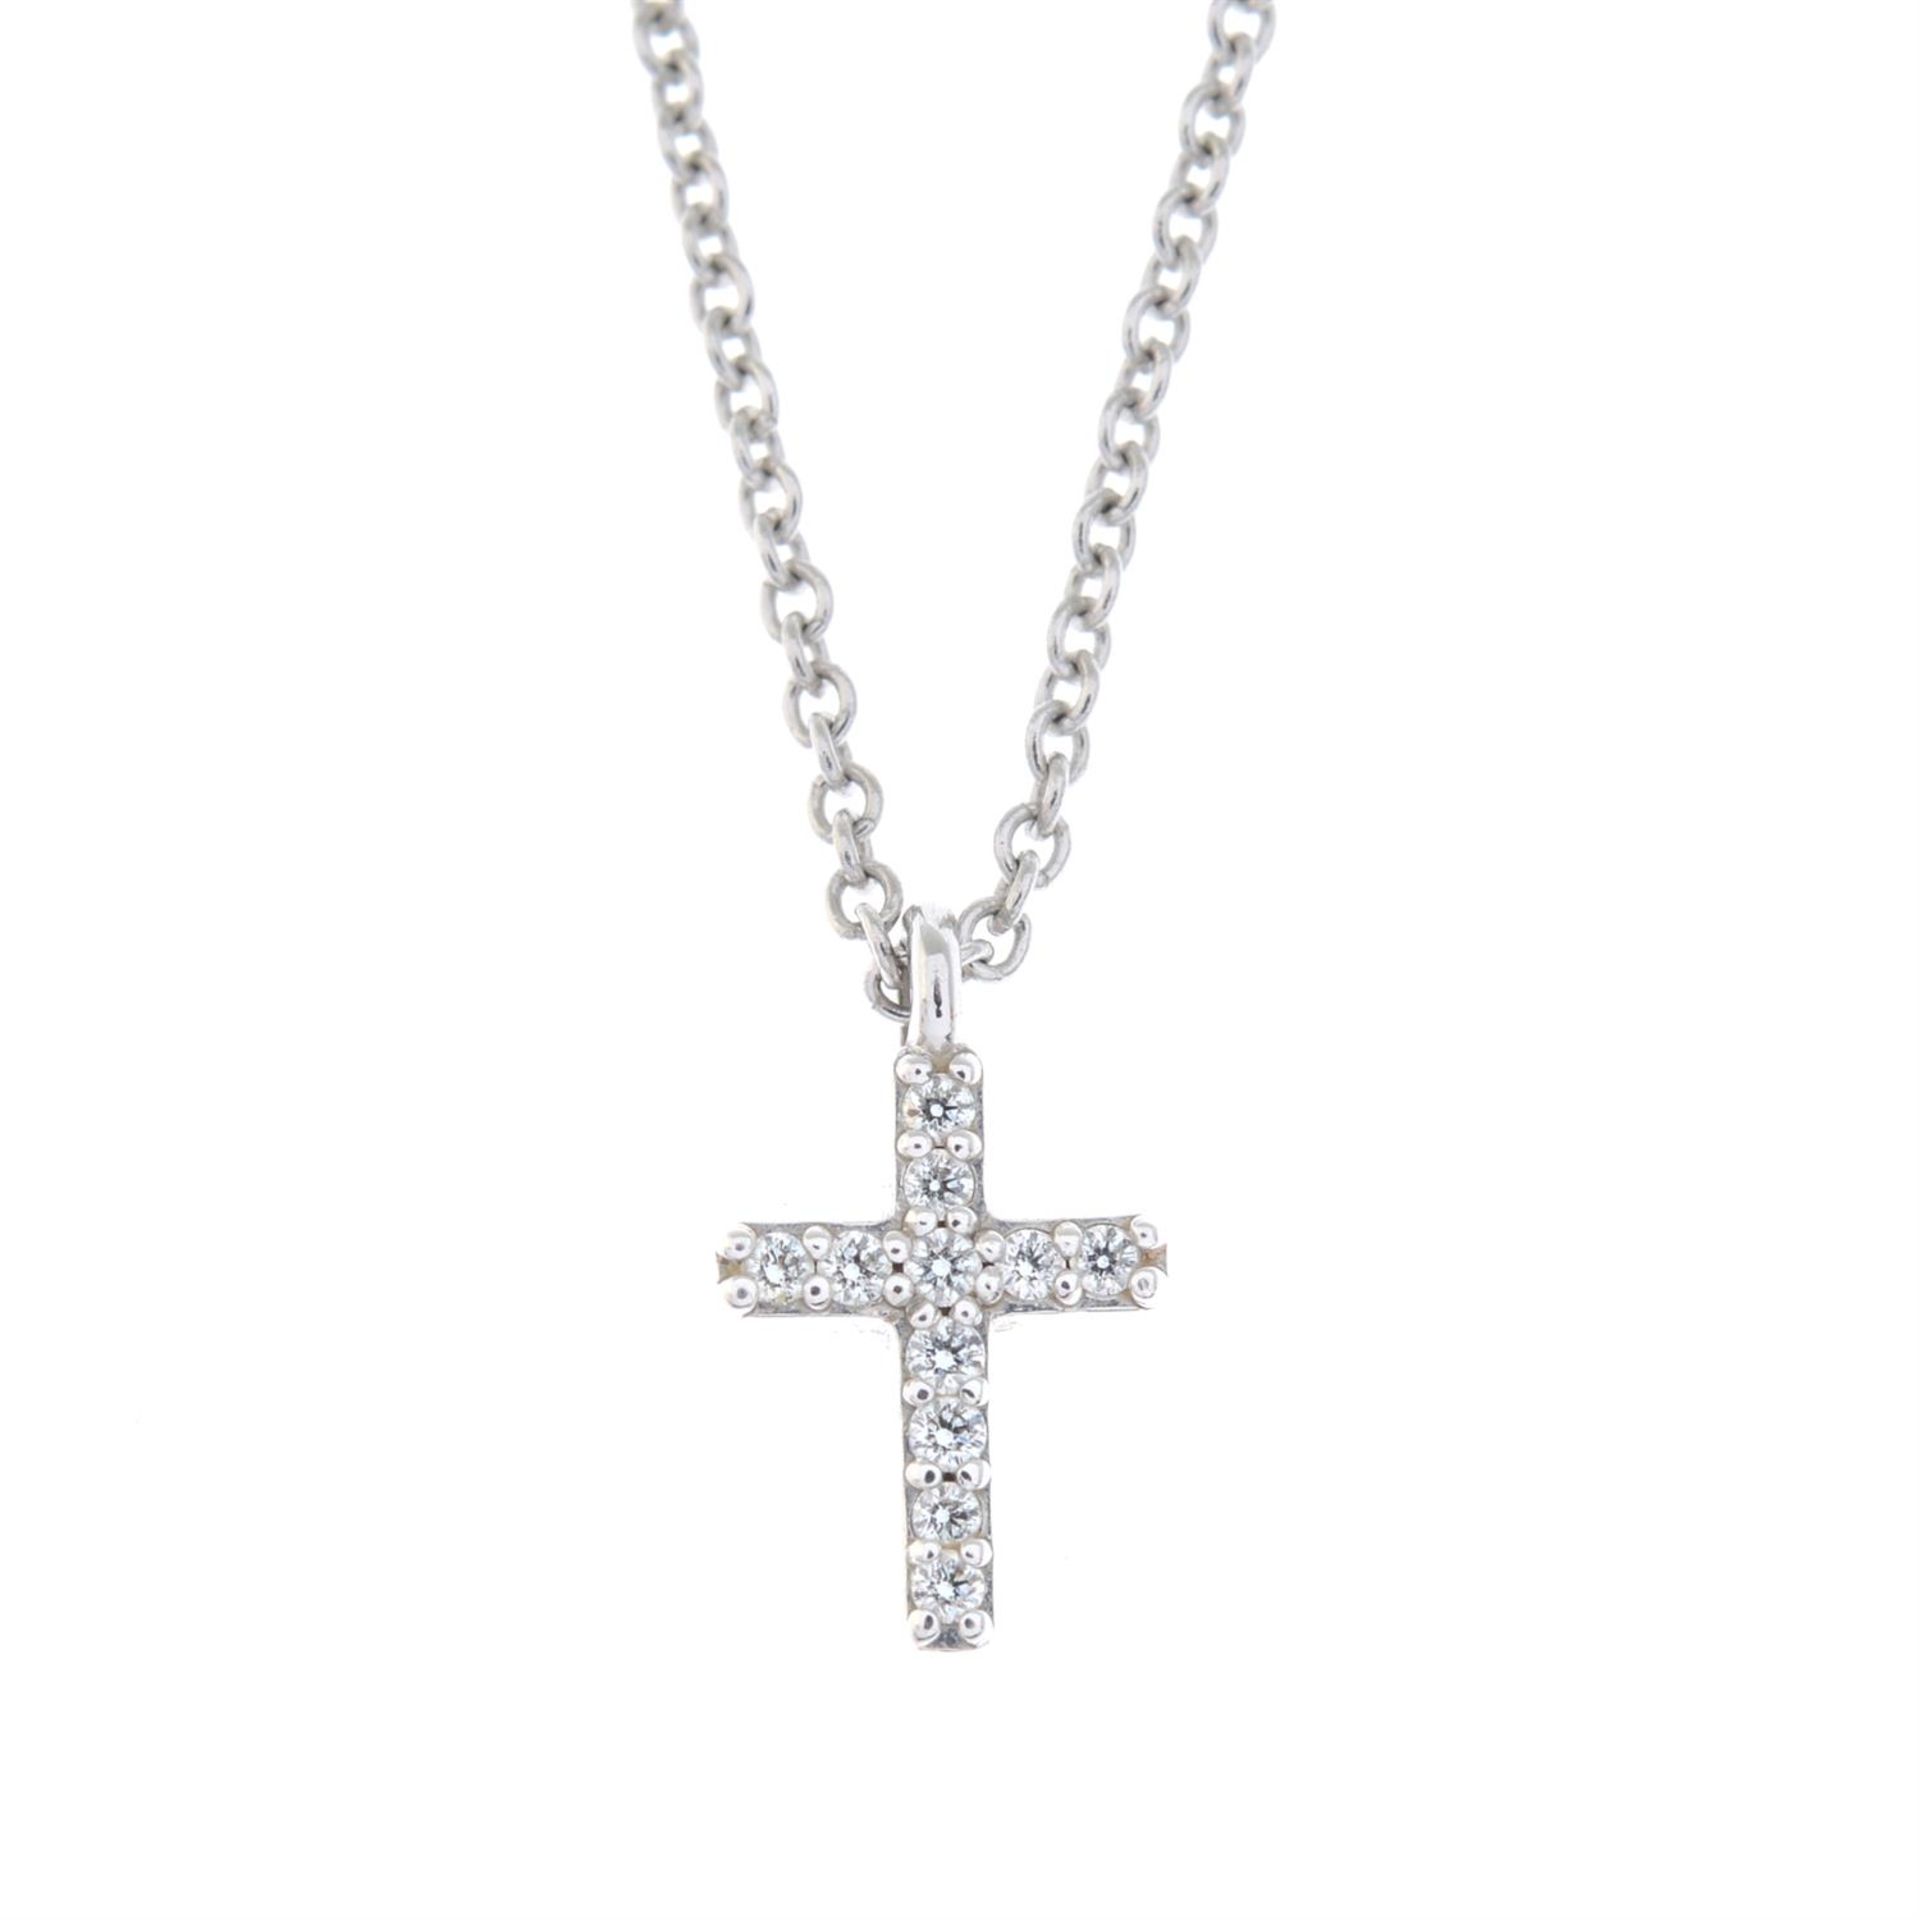 A diamond cross pendant, with chain, by Tiffany & Co.